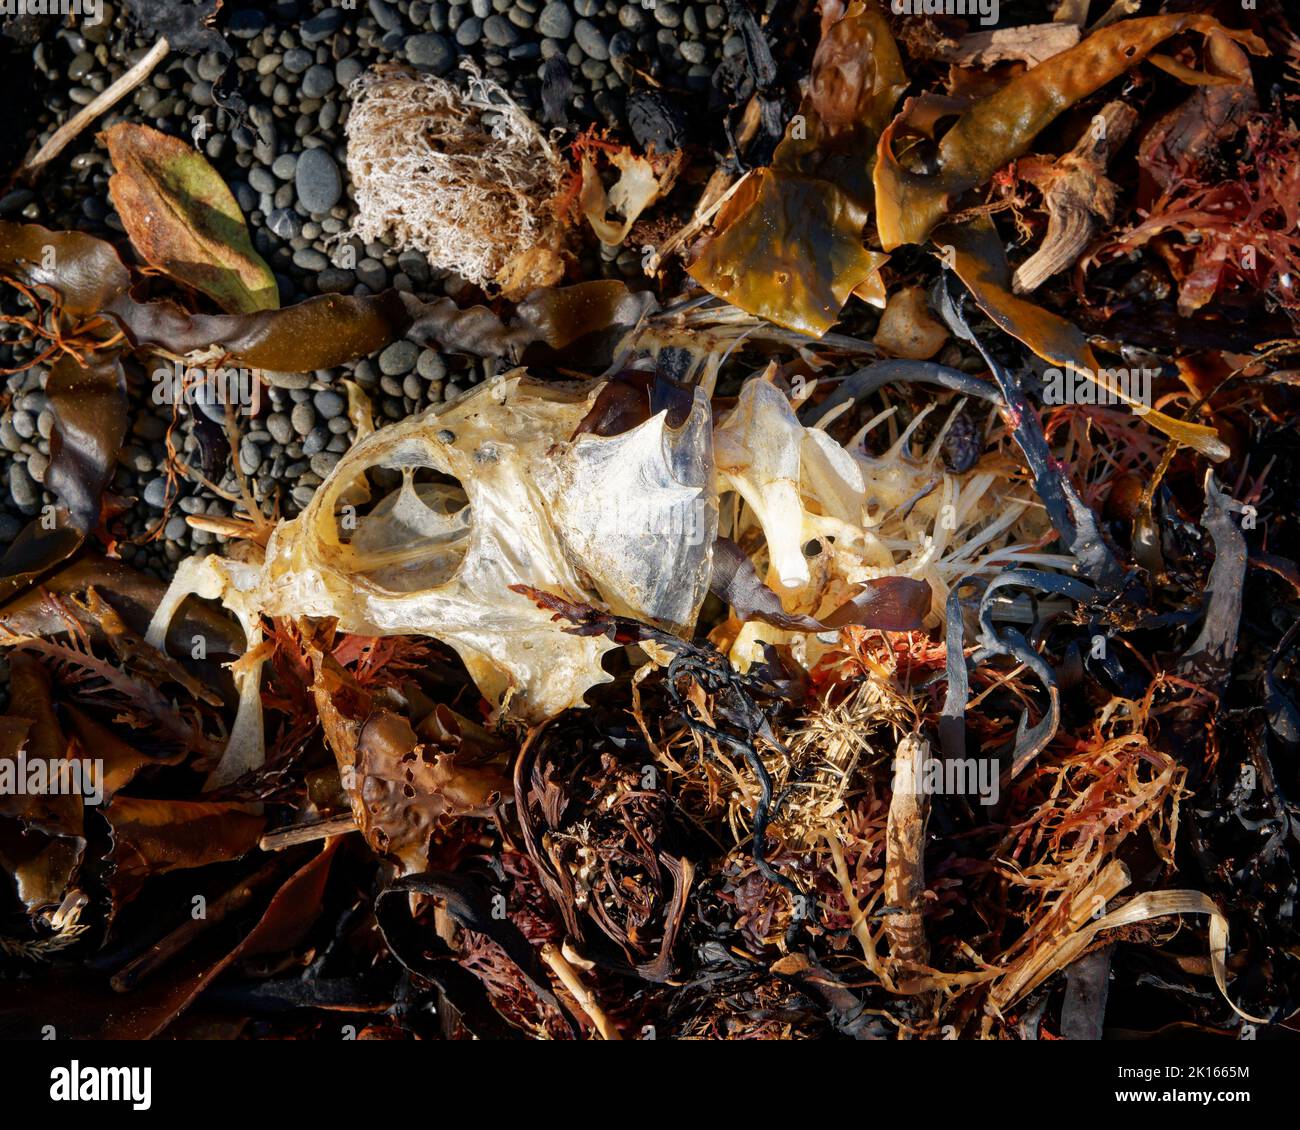 Fish bones, all that remain of a fish washed up on a beach. Kaikoura, south island, Aotearoa / New Zealand. Stock Photo